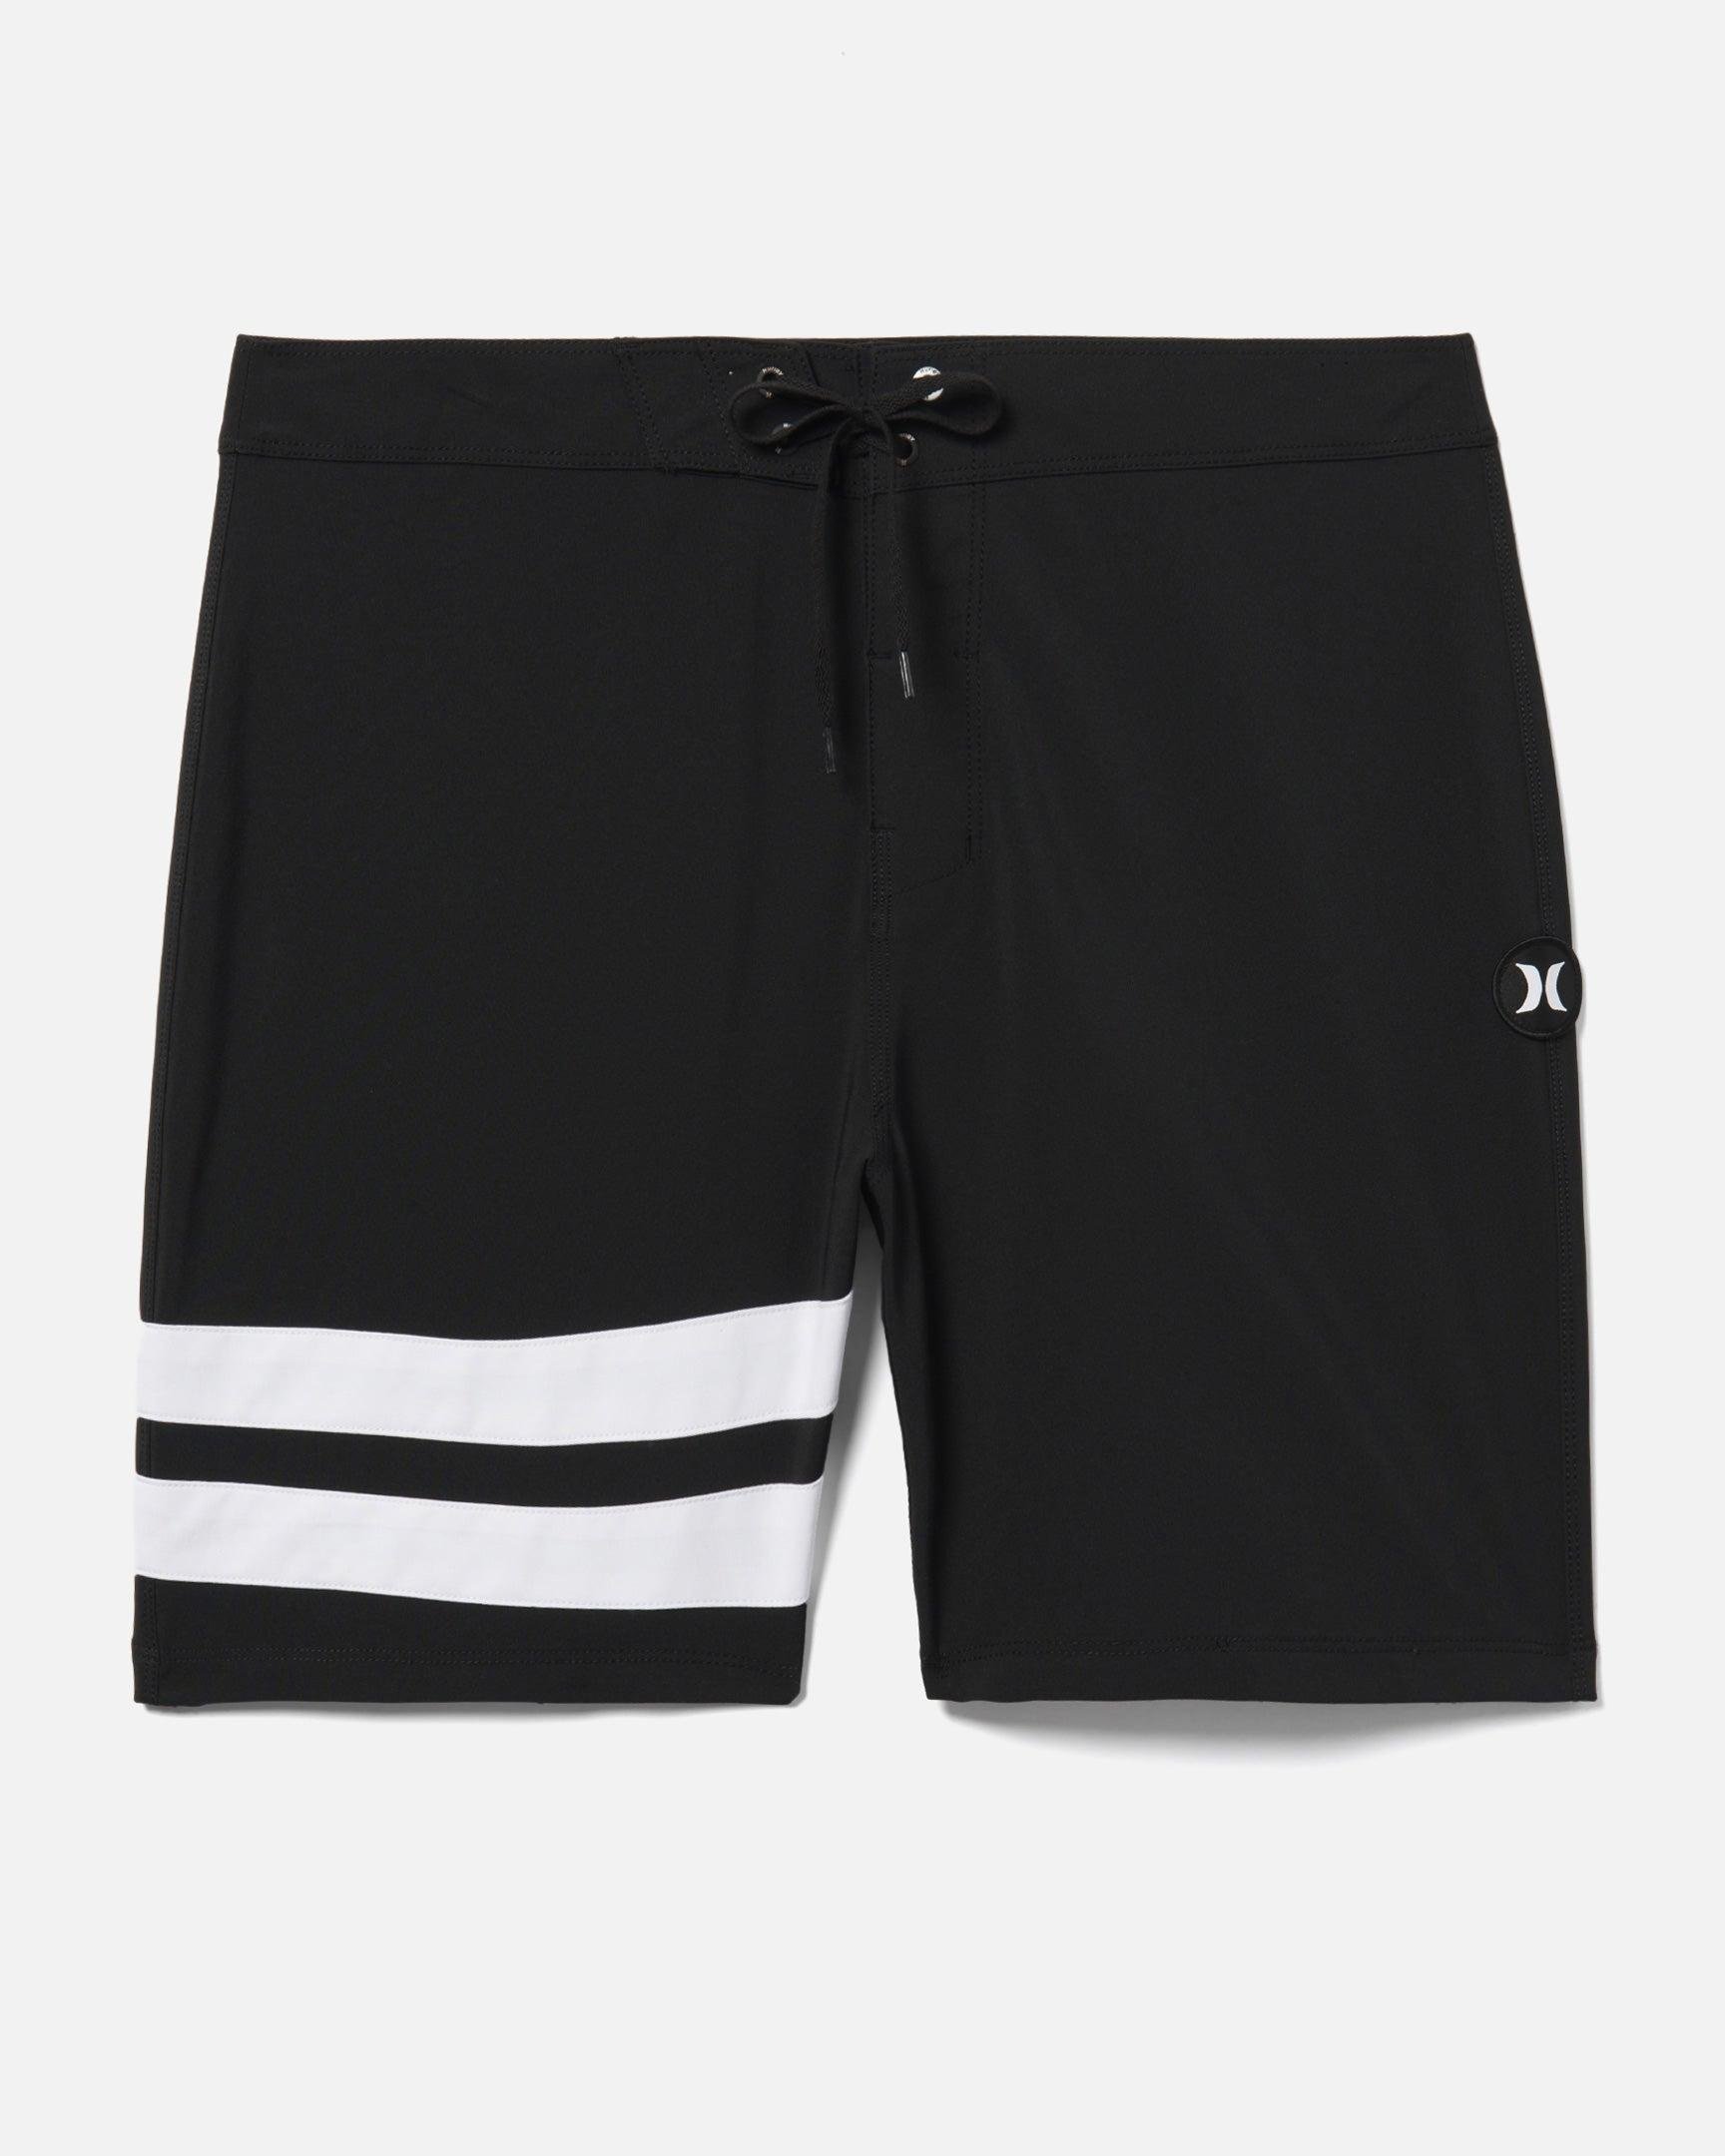 Men's Block Party Boardshorts 18" by HURLEY